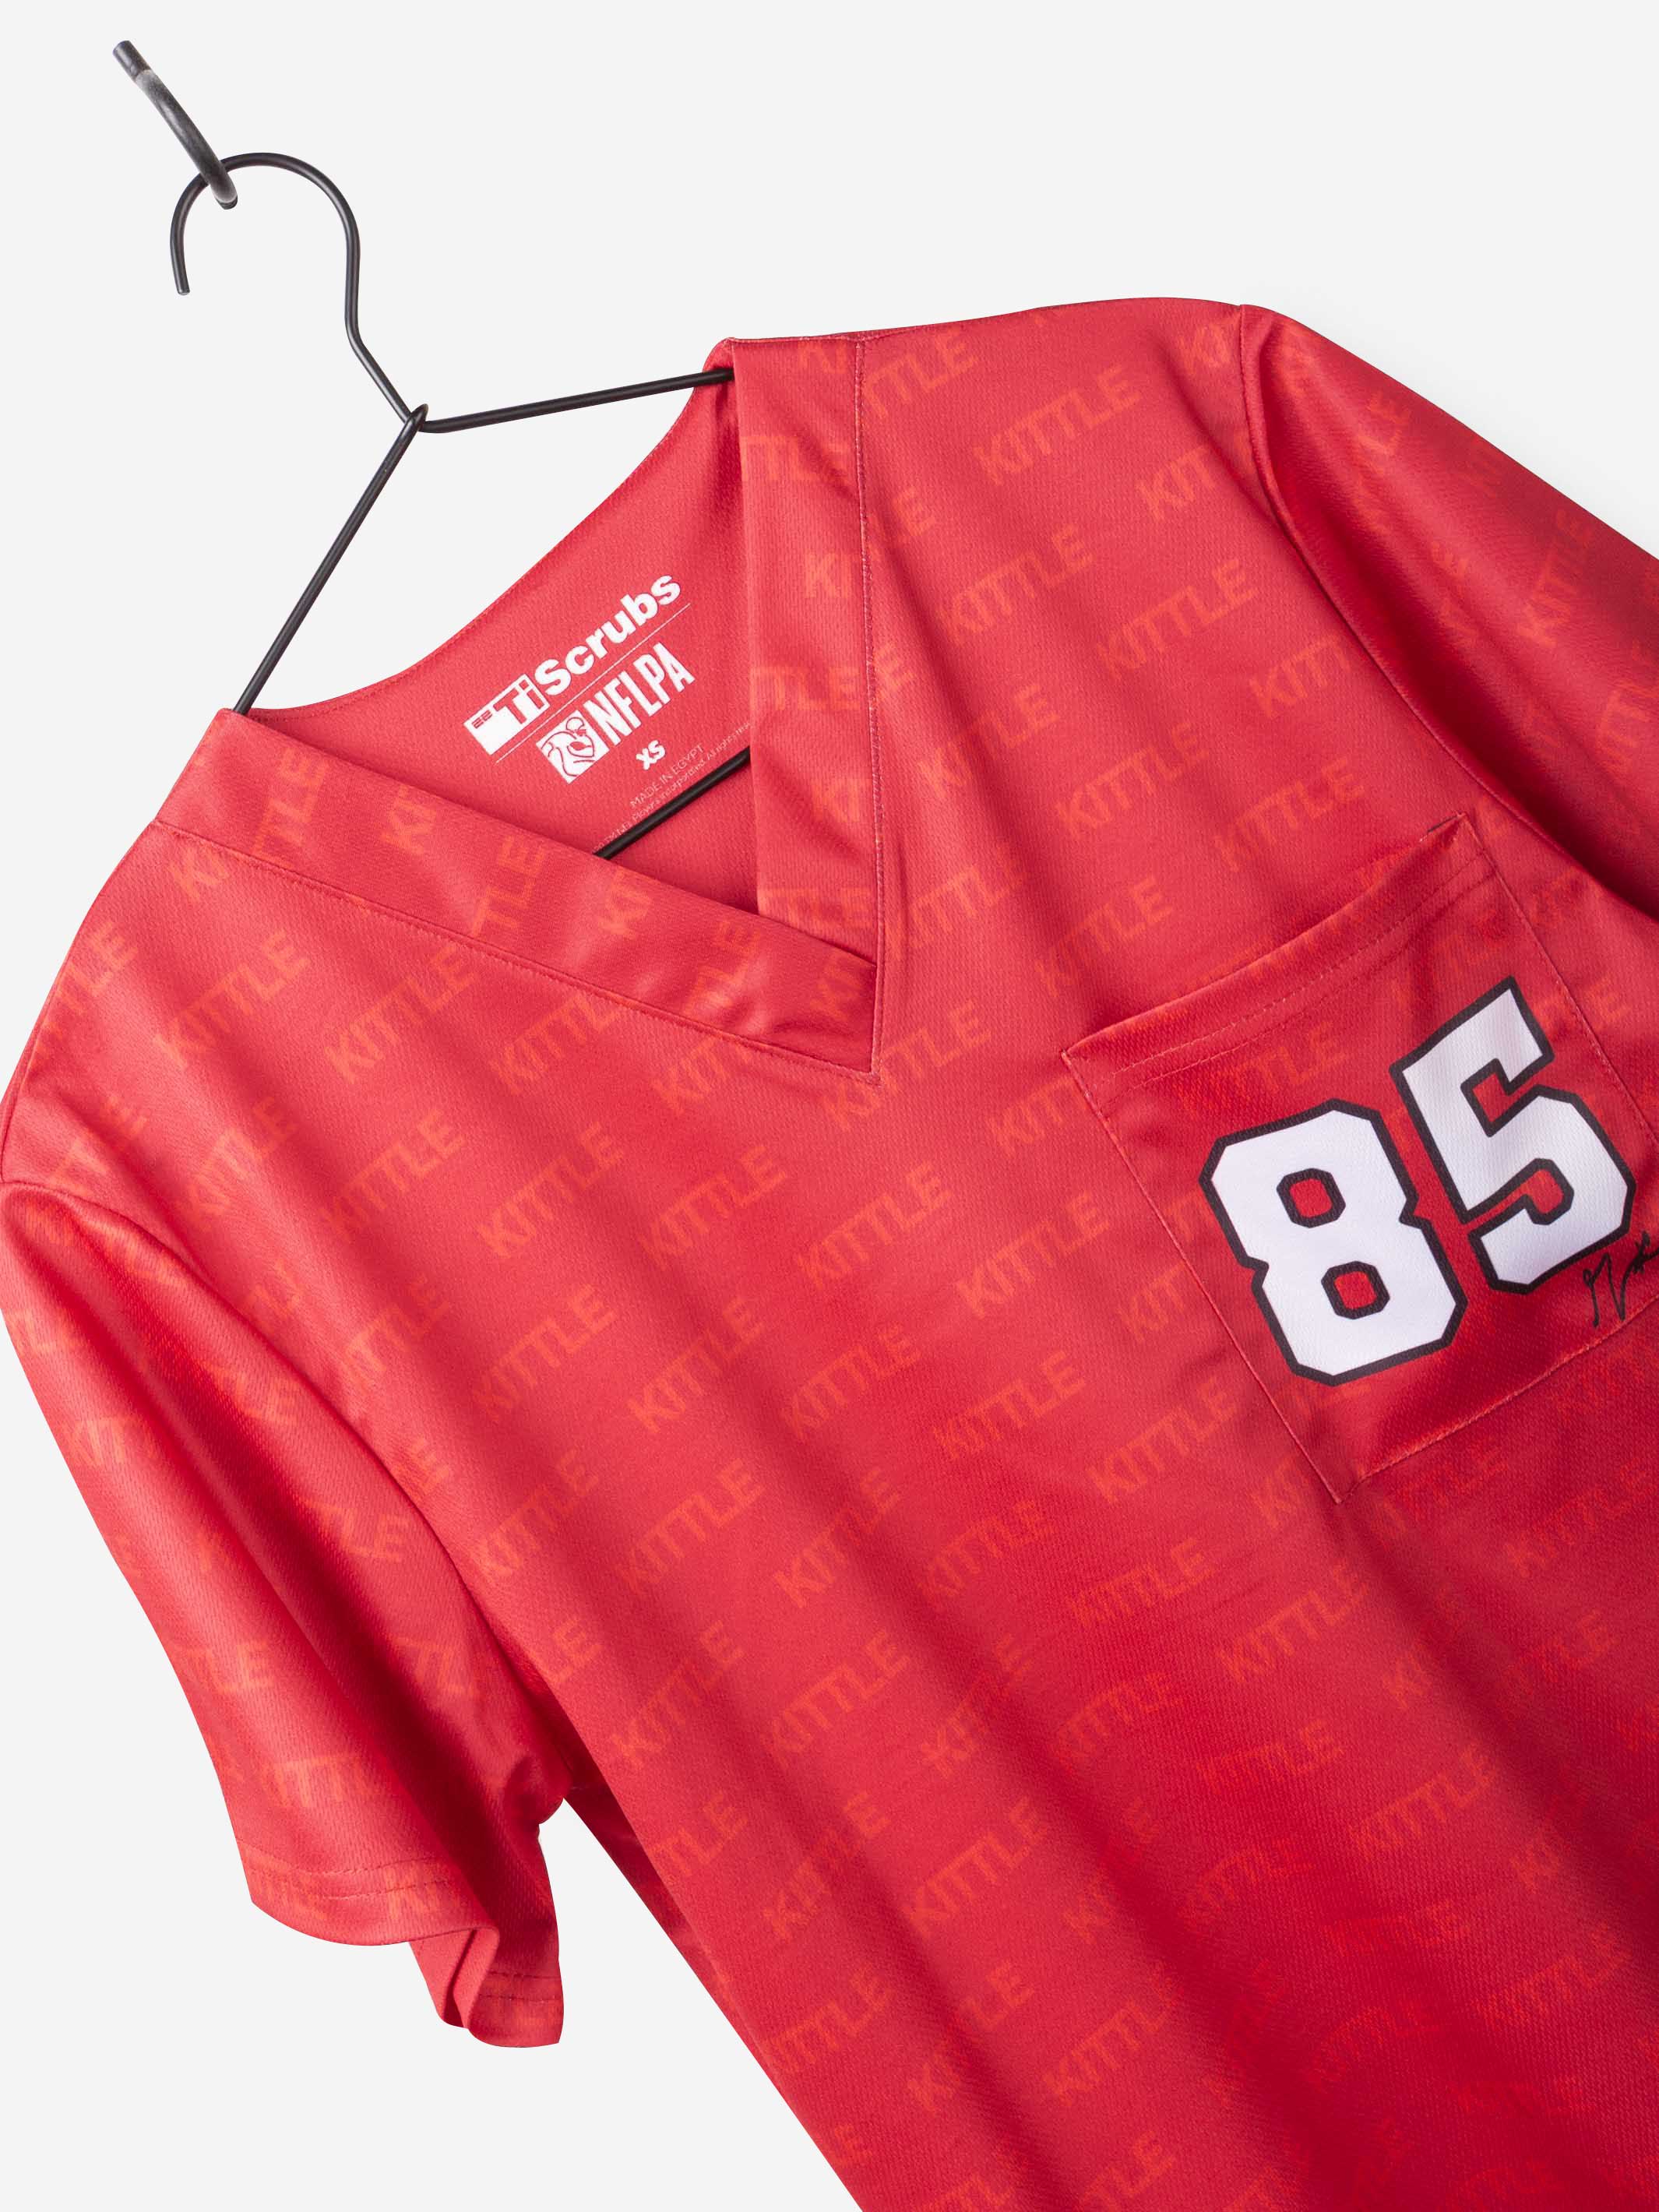 Men&#39;s George Kittle Scrub Top Jersey in red